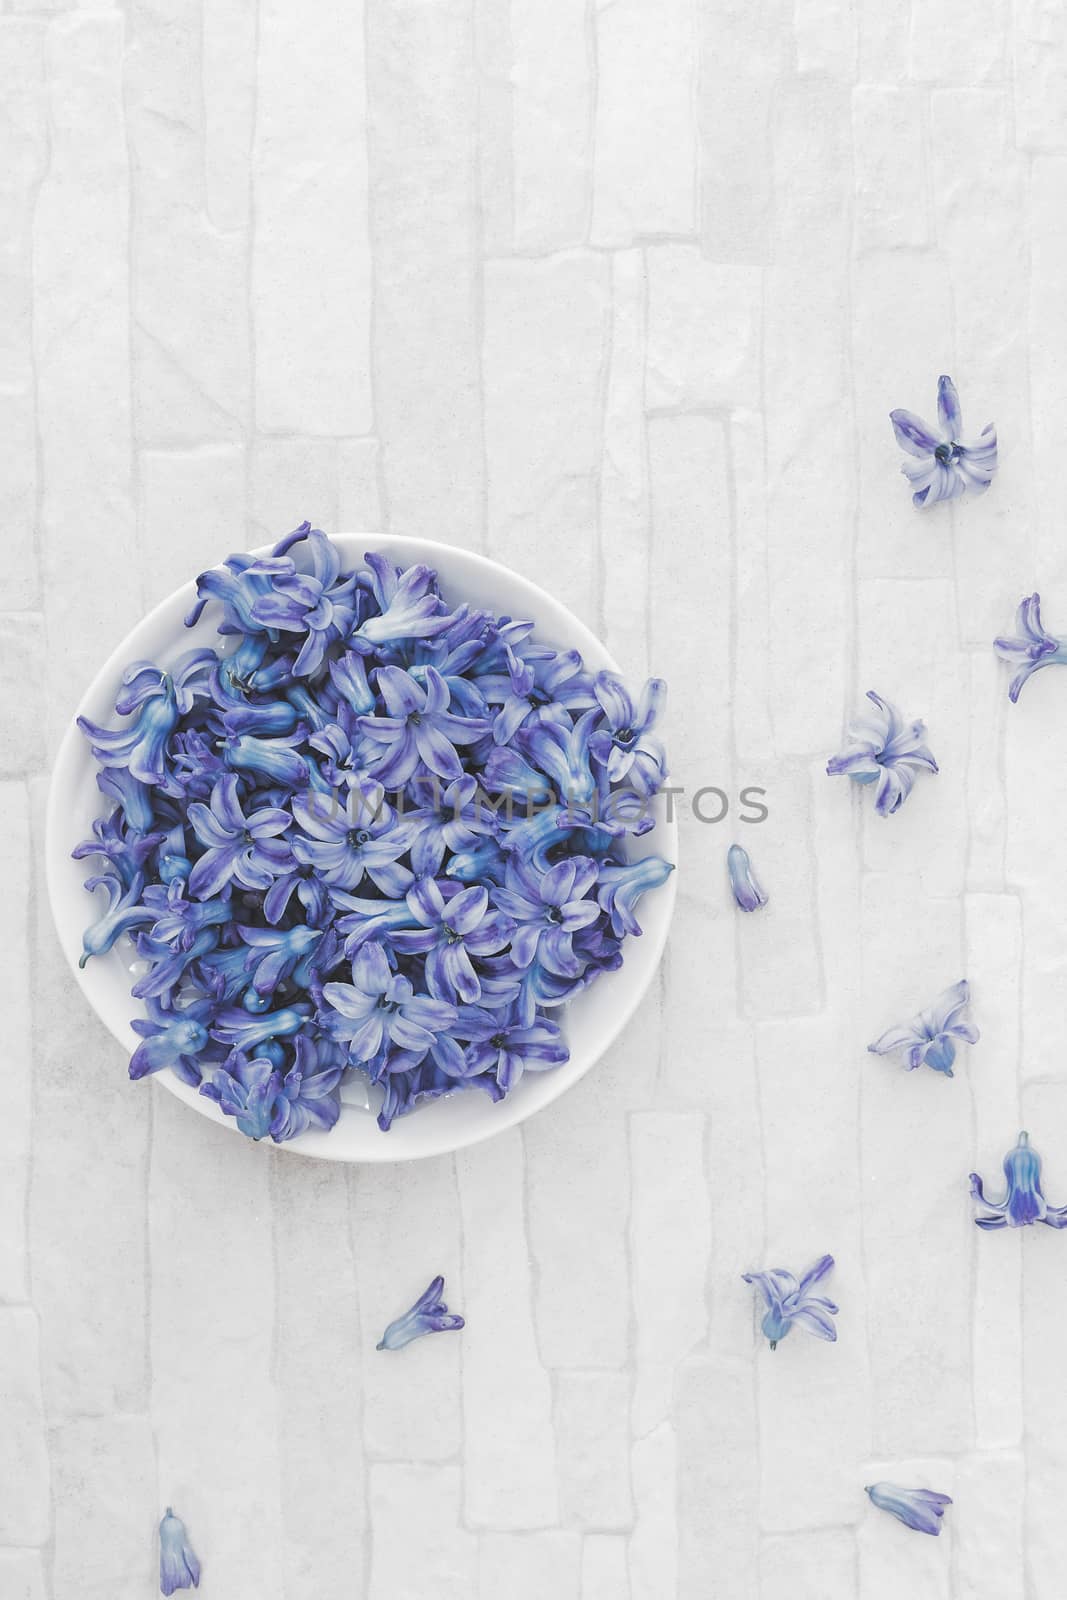 Fresh blue Hyacinth flowers in bowl on rustic wooden background. Overhead view with blank space